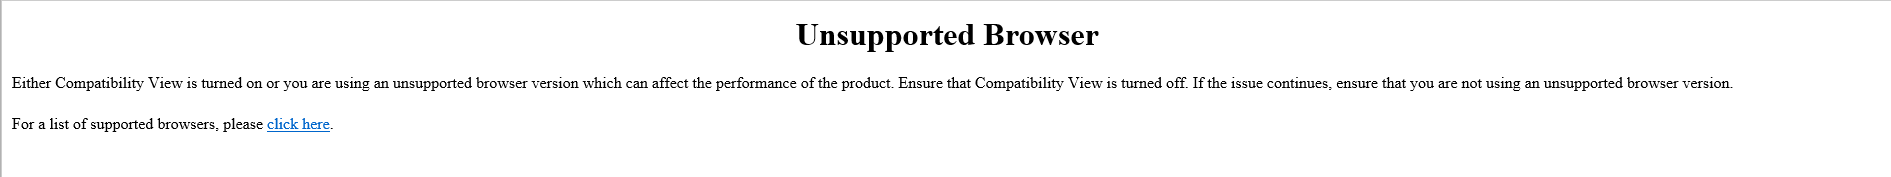 UnsupportedBrowser.png